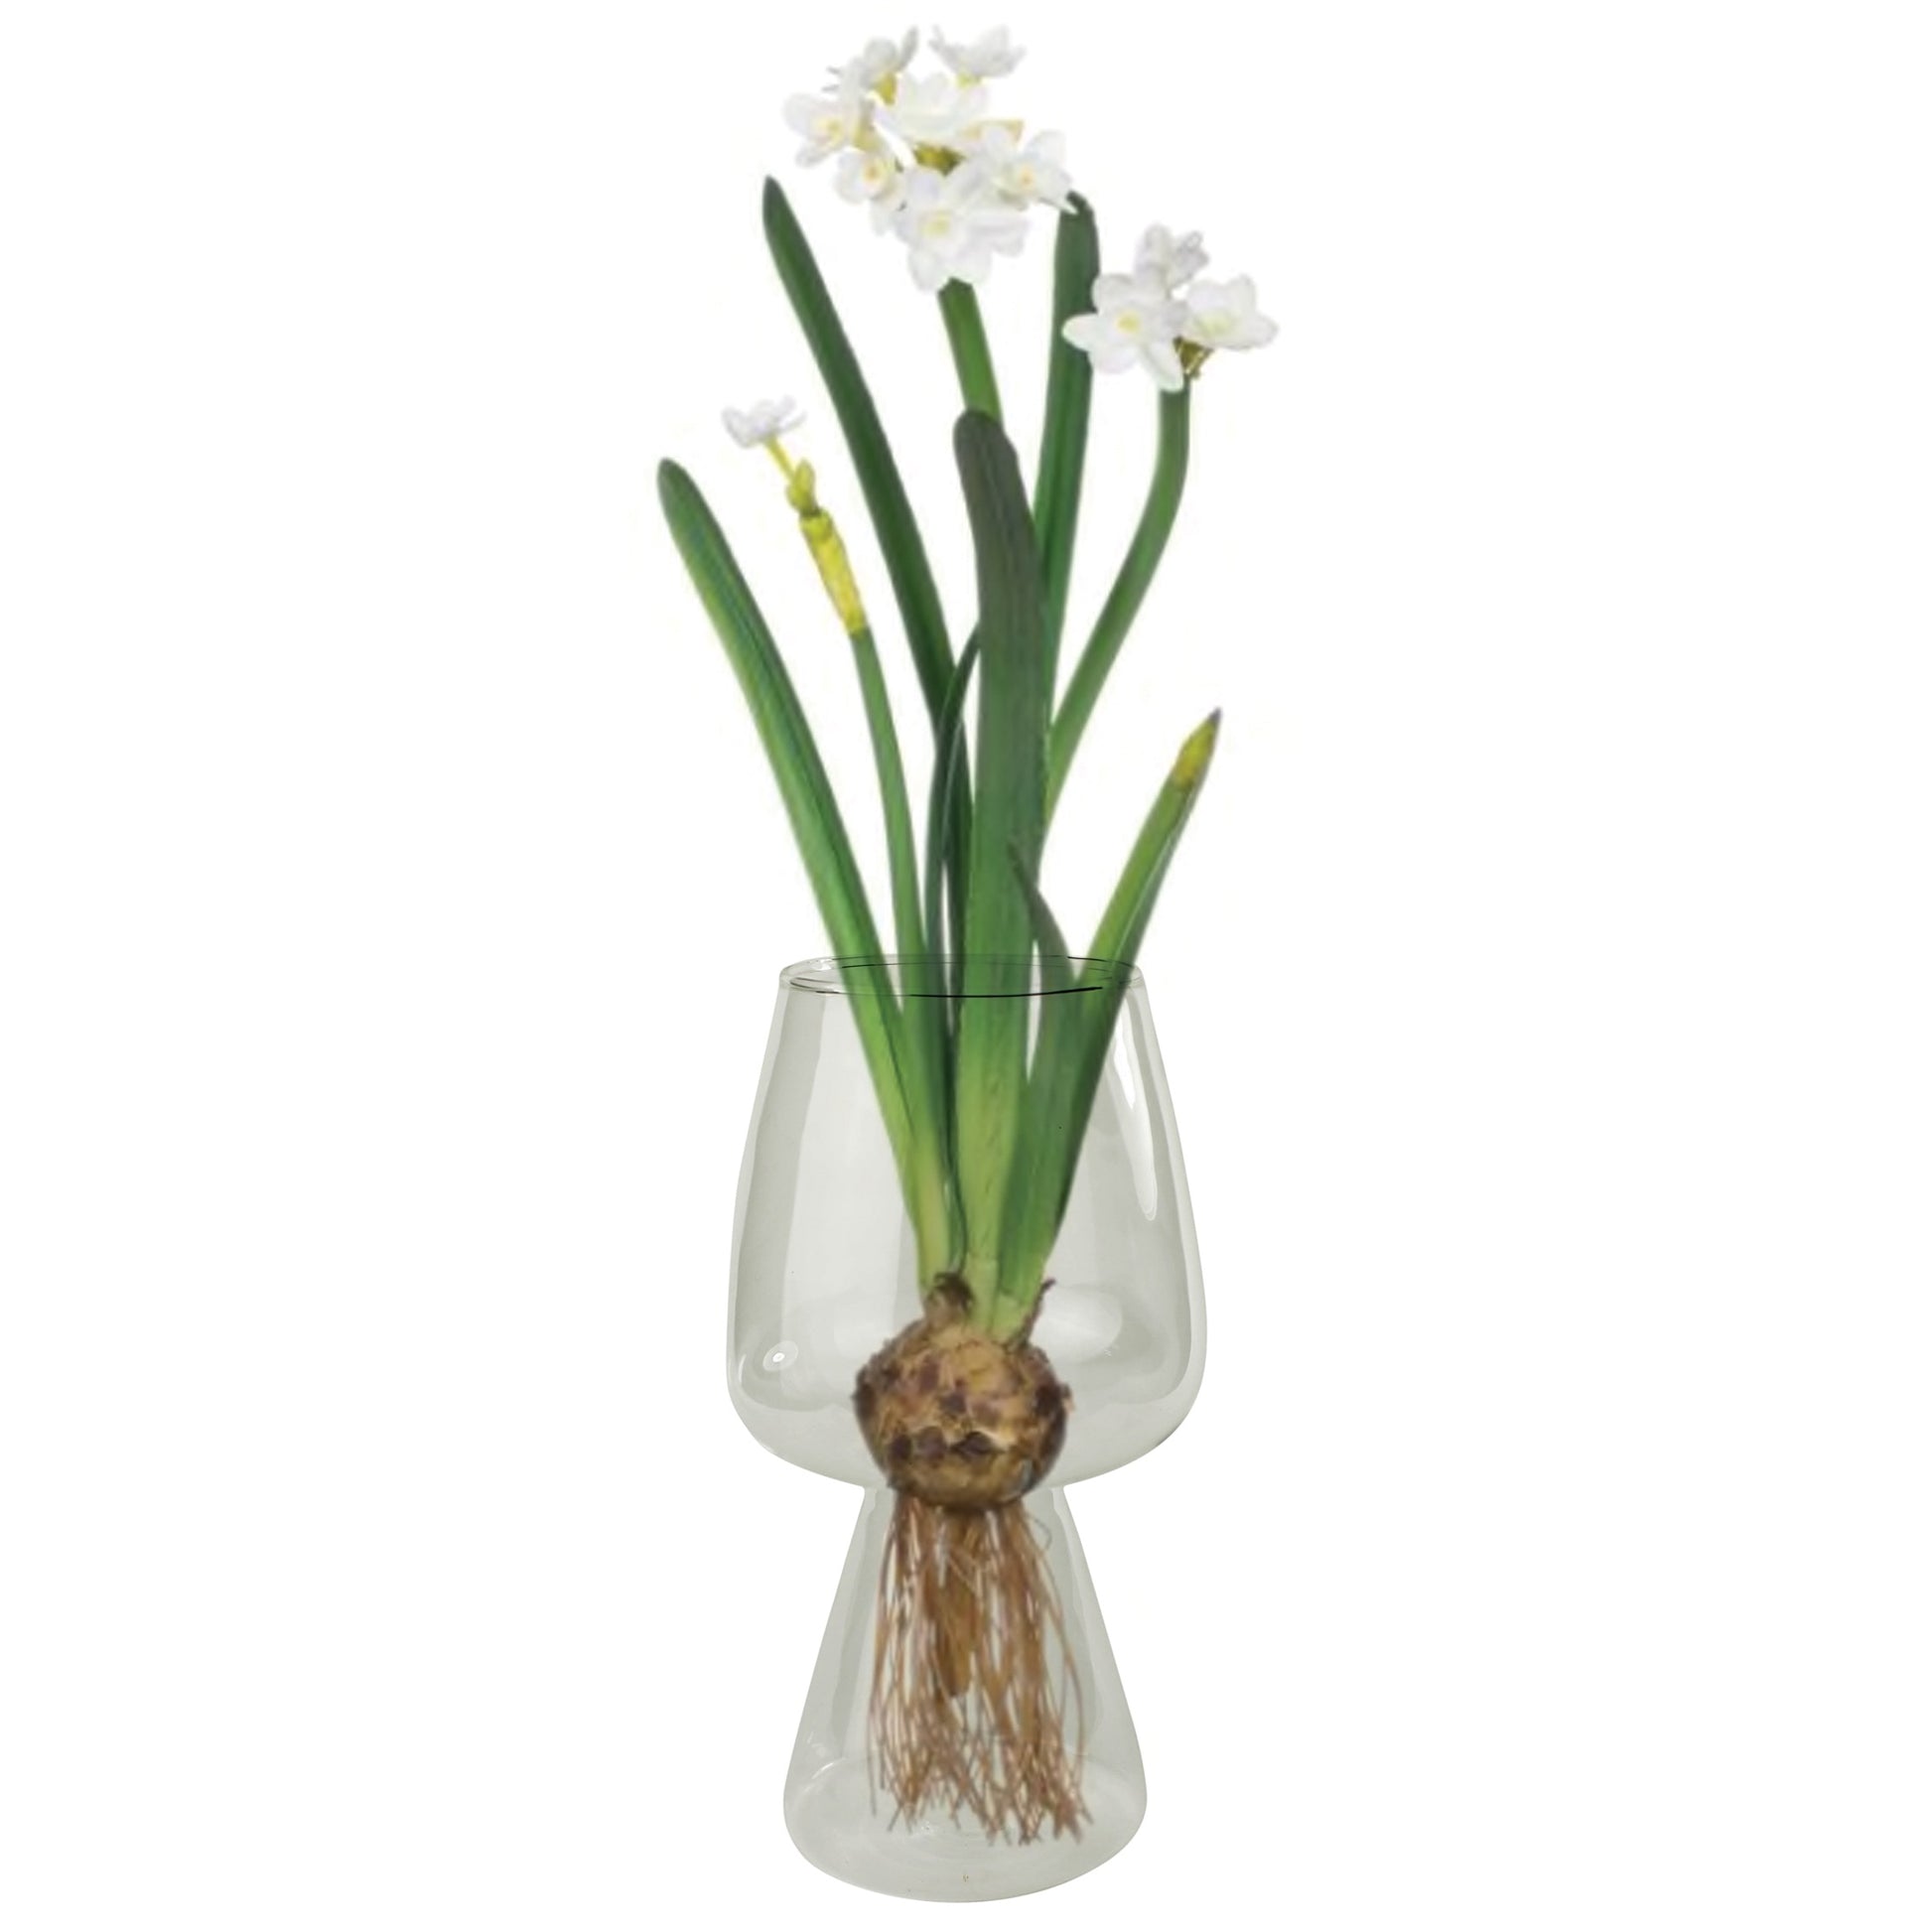 Glass bulb vase with paperwhite flowers rooting. 